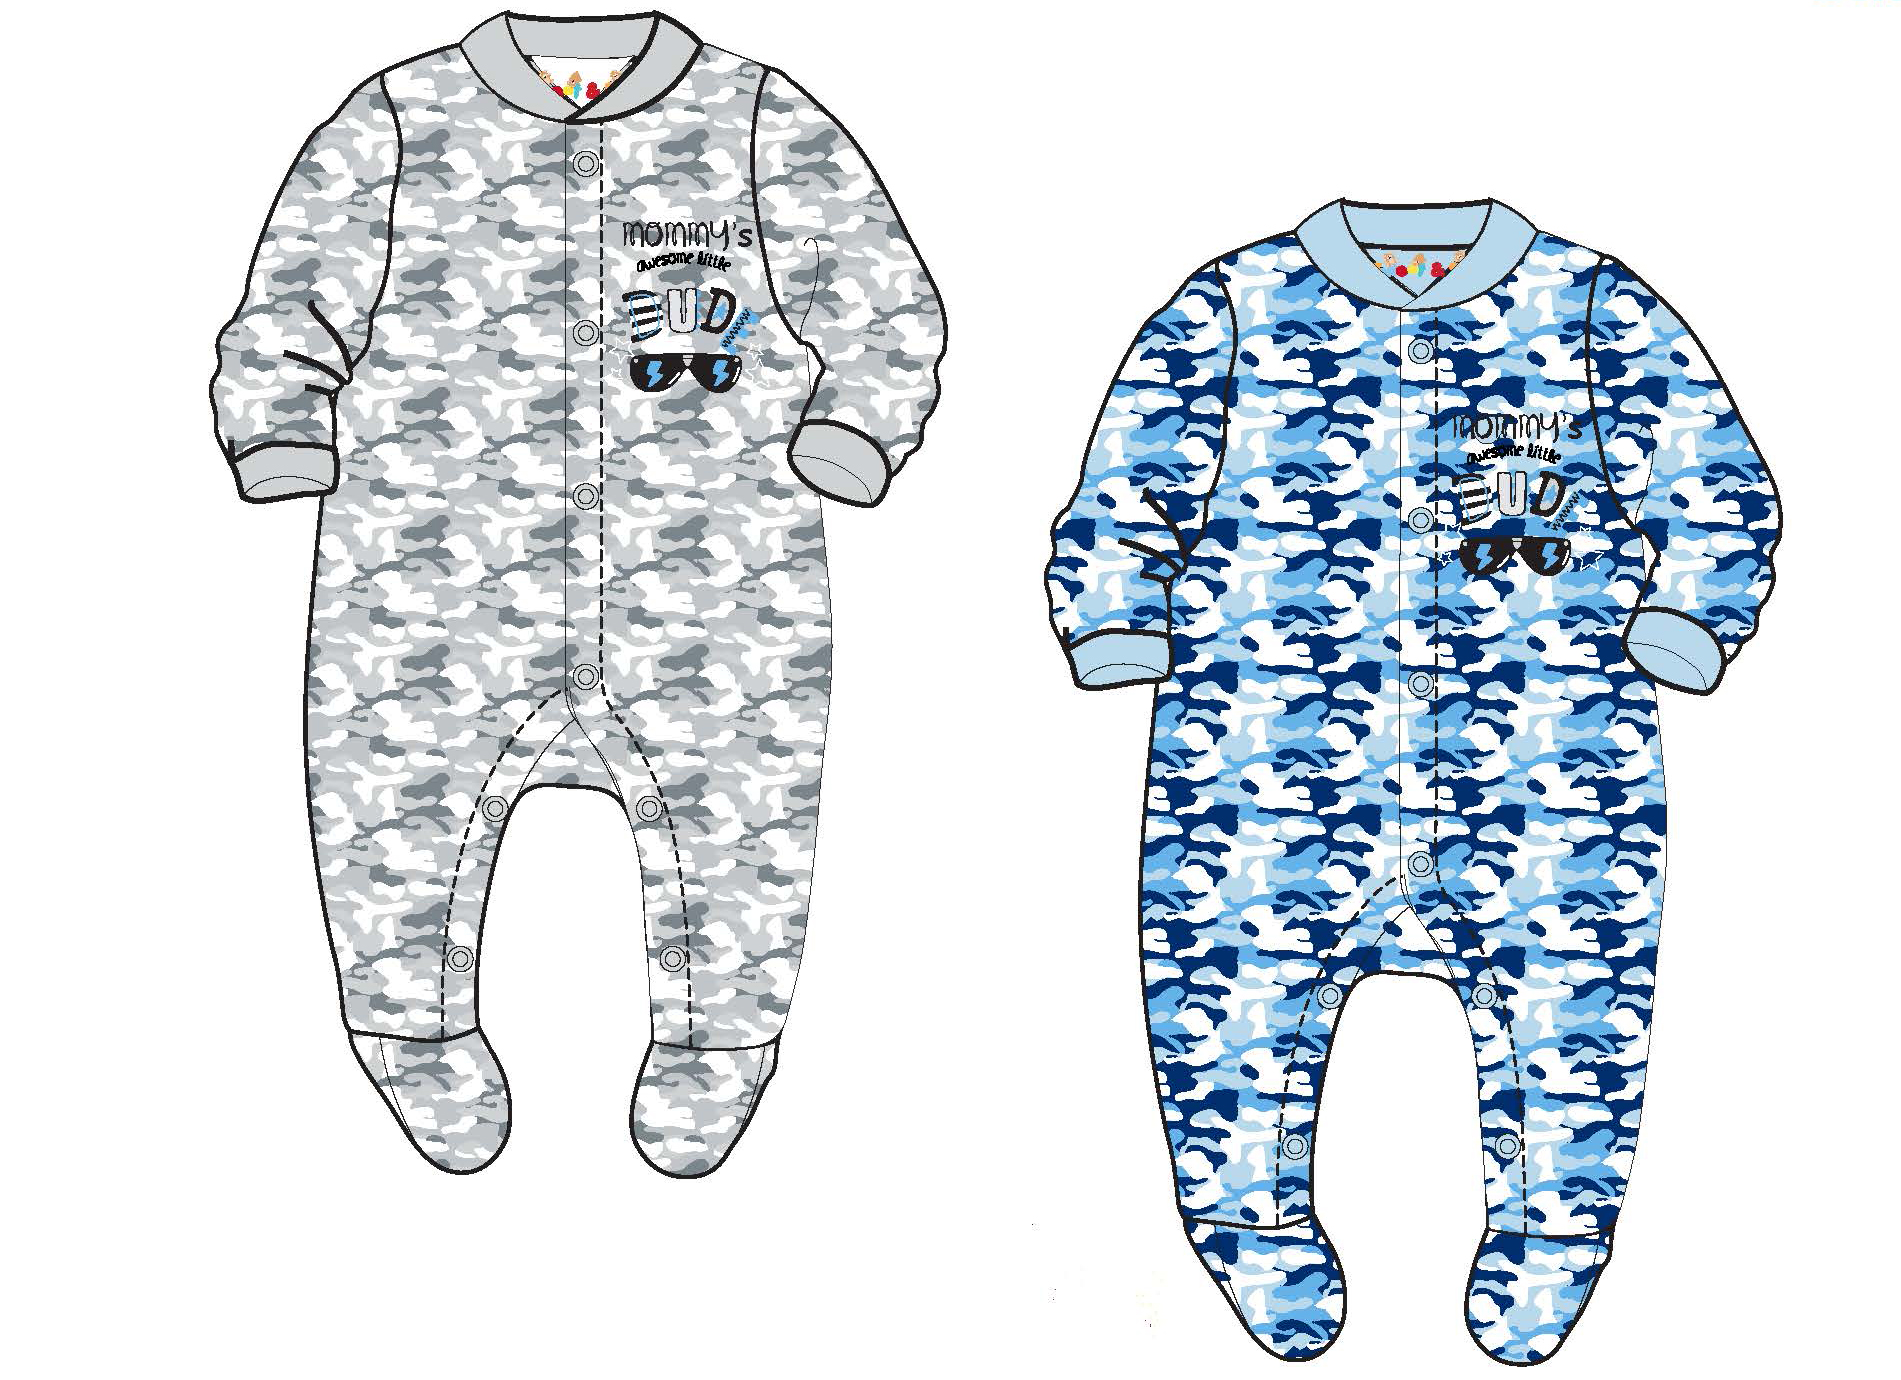 Baby Boy's Knit Striped Footed PAJAMAS w/ Mommy's Little Dude Print